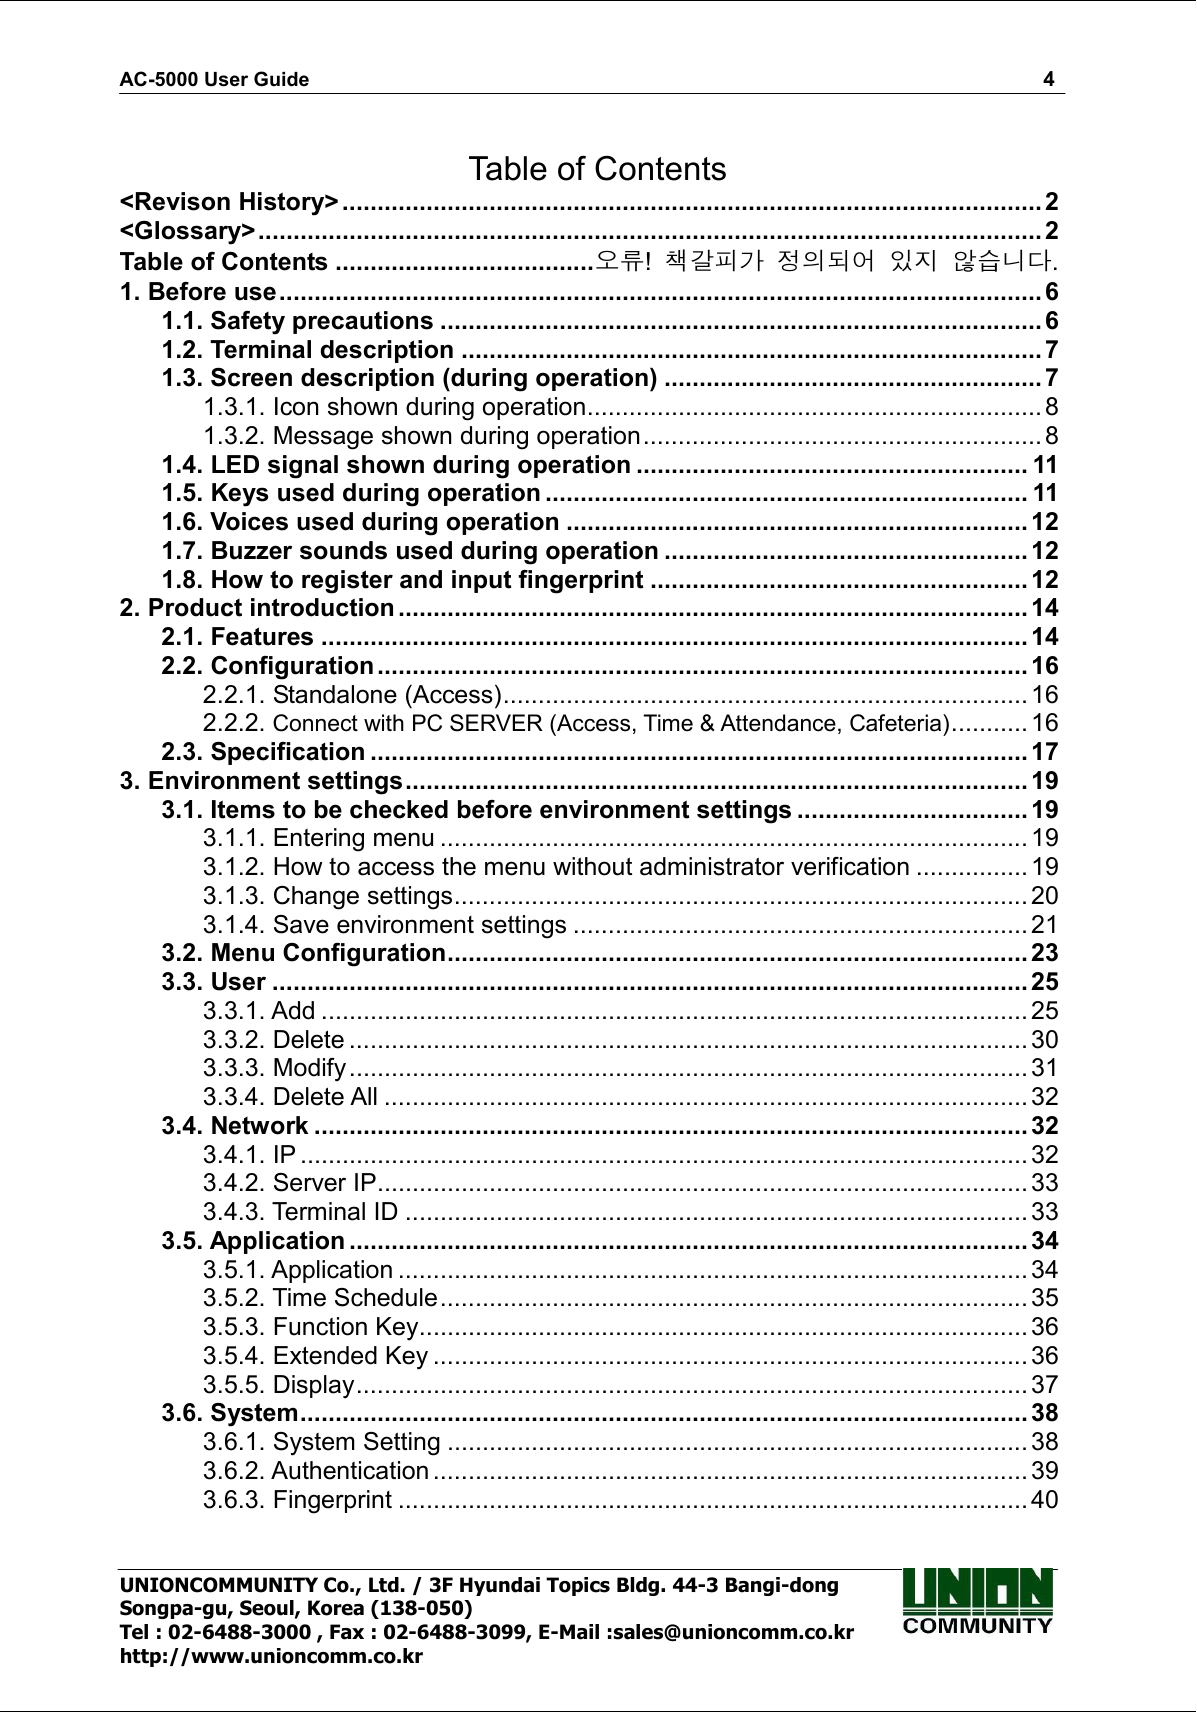 AC-5000 User Guide                                                                                                                                                   4 UNIONCOMMUNITY Co., Ltd. / 3F Hyundai Topics Bldg. 44-3 Bangi-dong Songpa-gu, Seoul, Korea (138-050) Tel : 02-6488-3000 , Fax : 02-6488-3099, E-Mail :sales@unioncomm.co.kr http://www.unioncomm.co.kr  Table of Contents &lt;Revison History&gt;.................................................................................................... 2 &lt;Glossary&gt;................................................................................................................ 2 Table of Contents .....................................오류!  책갈피가 정의되어 있지 않습니다. 1. Before use.............................................................................................................6 1.1. Safety precautions ......................................................................................6 1.2. Terminal description ................................................................................... 7 1.3. Screen description (during operation) ...................................................... 7 1.3.1. Icon shown during operation................................................................. 8 1.3.2. Message shown during operation......................................................... 8 1.4. LED signal shown during operation ........................................................ 11 1.5. Keys used during operation ..................................................................... 11 1.6. Voices used during operation ..................................................................12 1.7. Buzzer sounds used during operation .................................................... 12 1.8. How to register and input fingerprint ...................................................... 12 2. Product introduction..........................................................................................14 2.1. Features .....................................................................................................14 2.2. Configuration.............................................................................................16 2.2.1. Standalone (Access)...........................................................................16 2.2.2. Connect with PC SERVER (Access, Time &amp; Attendance, Cafeteria)........... 16 2.3. Specification .............................................................................................. 17 3. Environment settings......................................................................................... 19 3.1. Items to be checked before environment settings ................................. 19 3.1.1. Entering menu .................................................................................... 19 3.1.2. How to access the menu without administrator verification ................ 19 3.1.3. Change settings.................................................................................. 20 3.1.4. Save environment settings ................................................................. 21 3.2. Menu Configuration...................................................................................23 3.3. User ............................................................................................................ 25 3.3.1. Add ..................................................................................................... 25 3.3.2. Delete .................................................................................................30 3.3.3. Modify.................................................................................................31 3.3.4. Delete All ............................................................................................ 32 3.4. Network ...................................................................................................... 32 3.4.1. IP ........................................................................................................32 3.4.2. Server IP.............................................................................................33 3.4.3. Terminal ID ......................................................................................... 33 3.5. Application .................................................................................................34 3.5.1. Application .......................................................................................... 34 3.5.2. Time Schedule....................................................................................35 3.5.3. Function Key.......................................................................................36 3.5.4. Extended Key ..................................................................................... 36 3.5.5. Display................................................................................................37 3.6. System........................................................................................................38 3.6.1. System Setting ...................................................................................38 3.6.2. Authentication ..................................................................................... 39 3.6.3. Fingerprint .......................................................................................... 40 